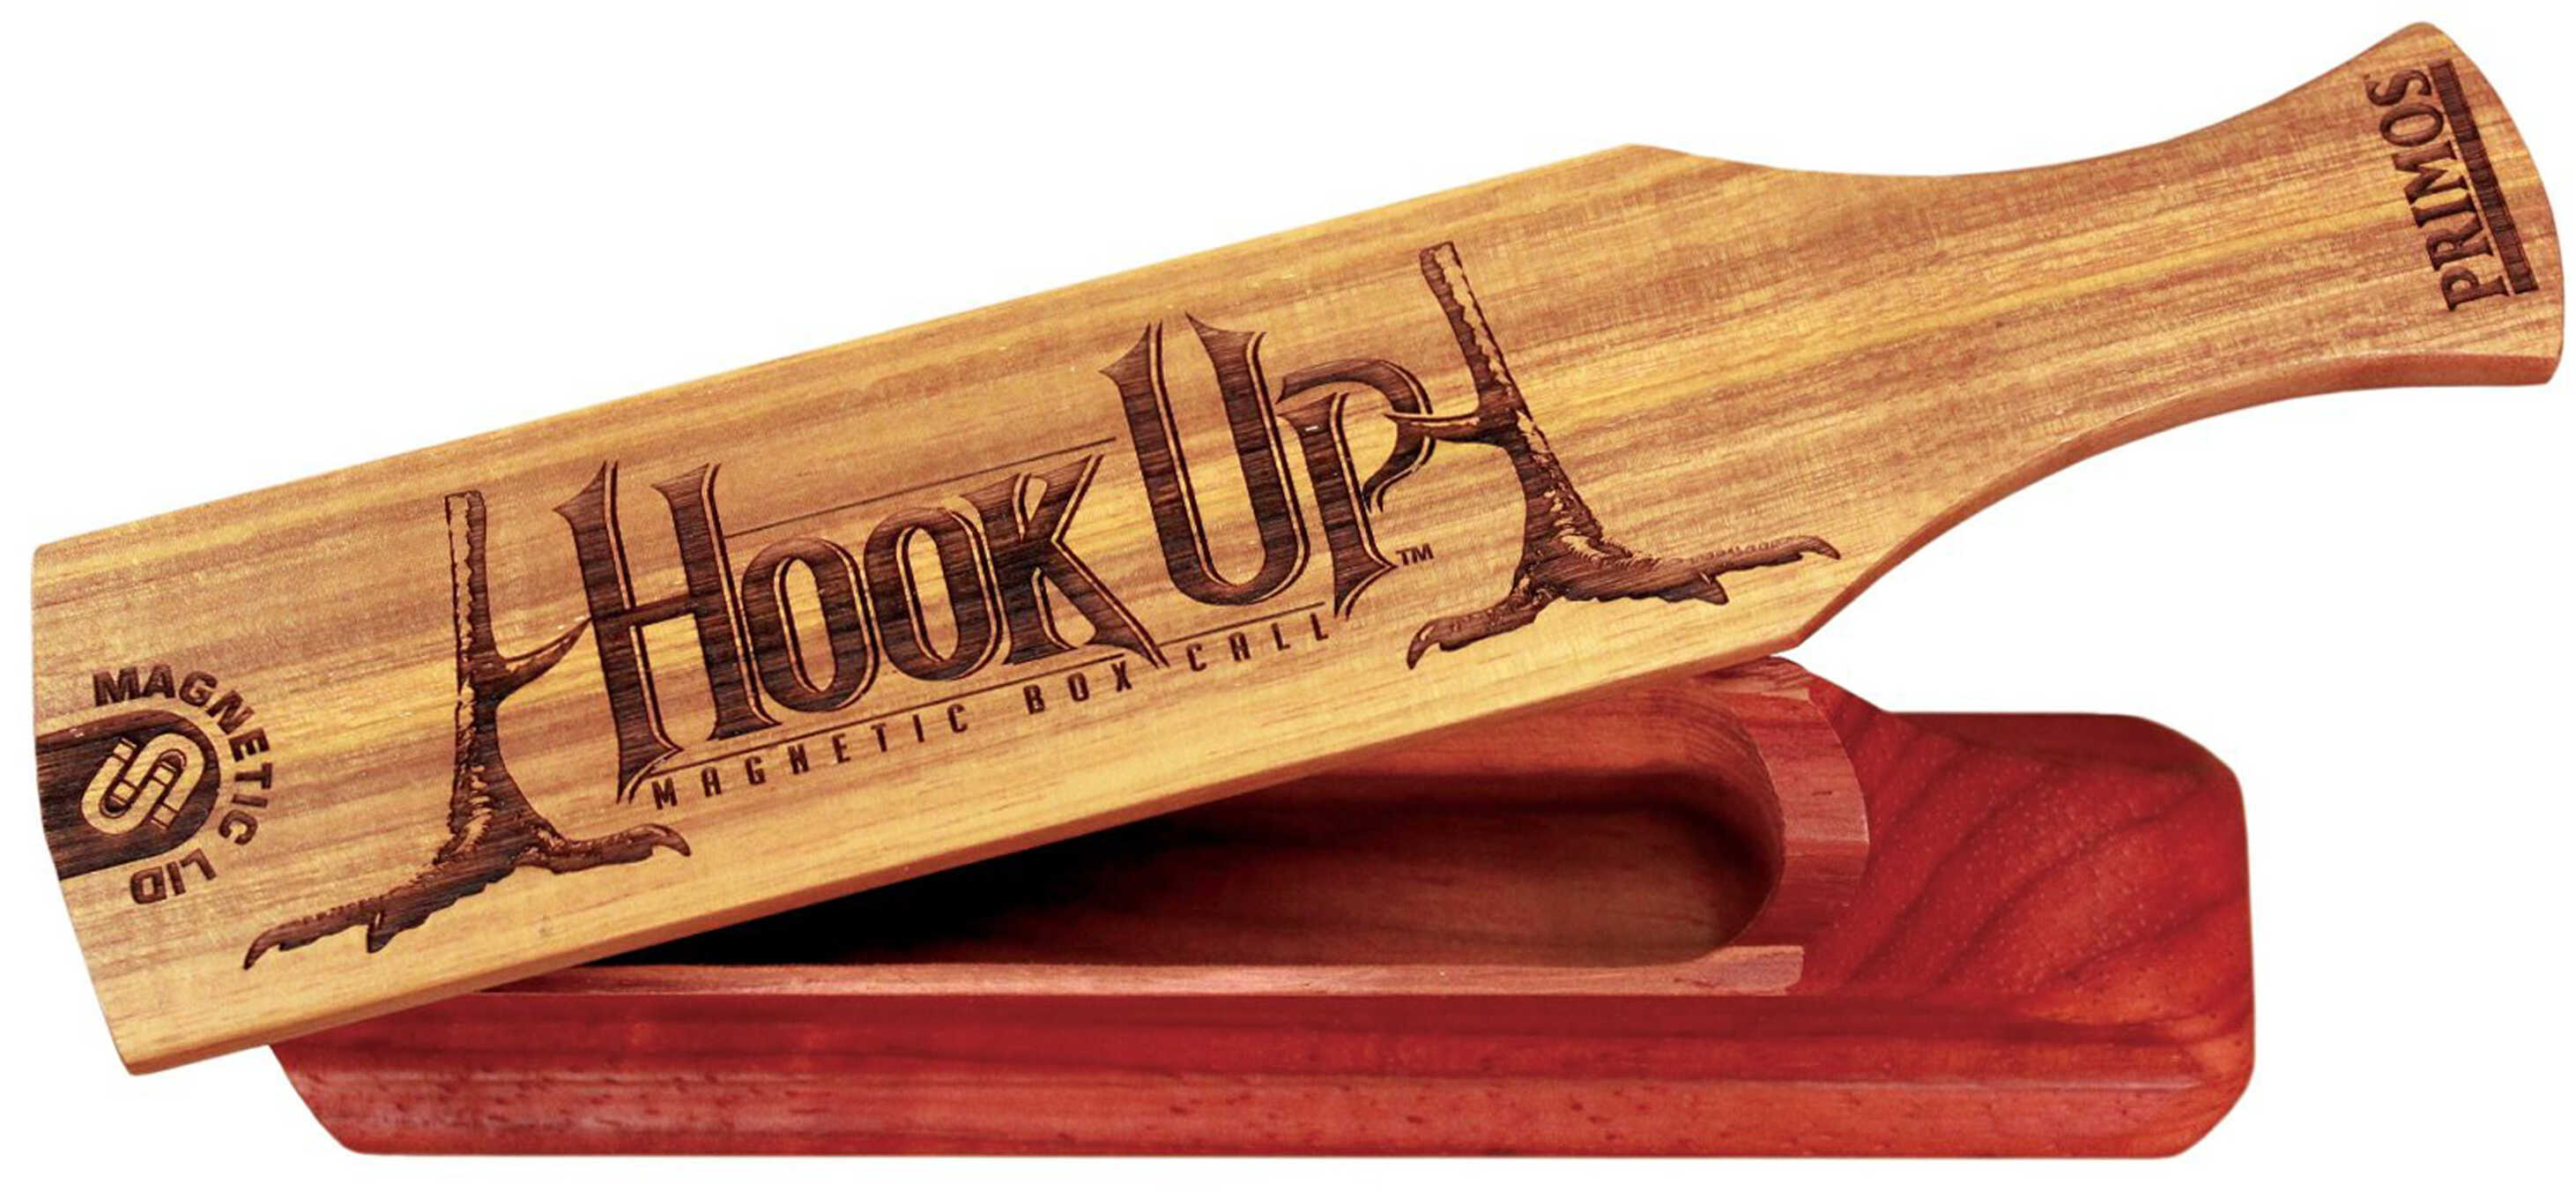 Primos Friction Turkey Call Hook Up Magnetic Box Md: 259